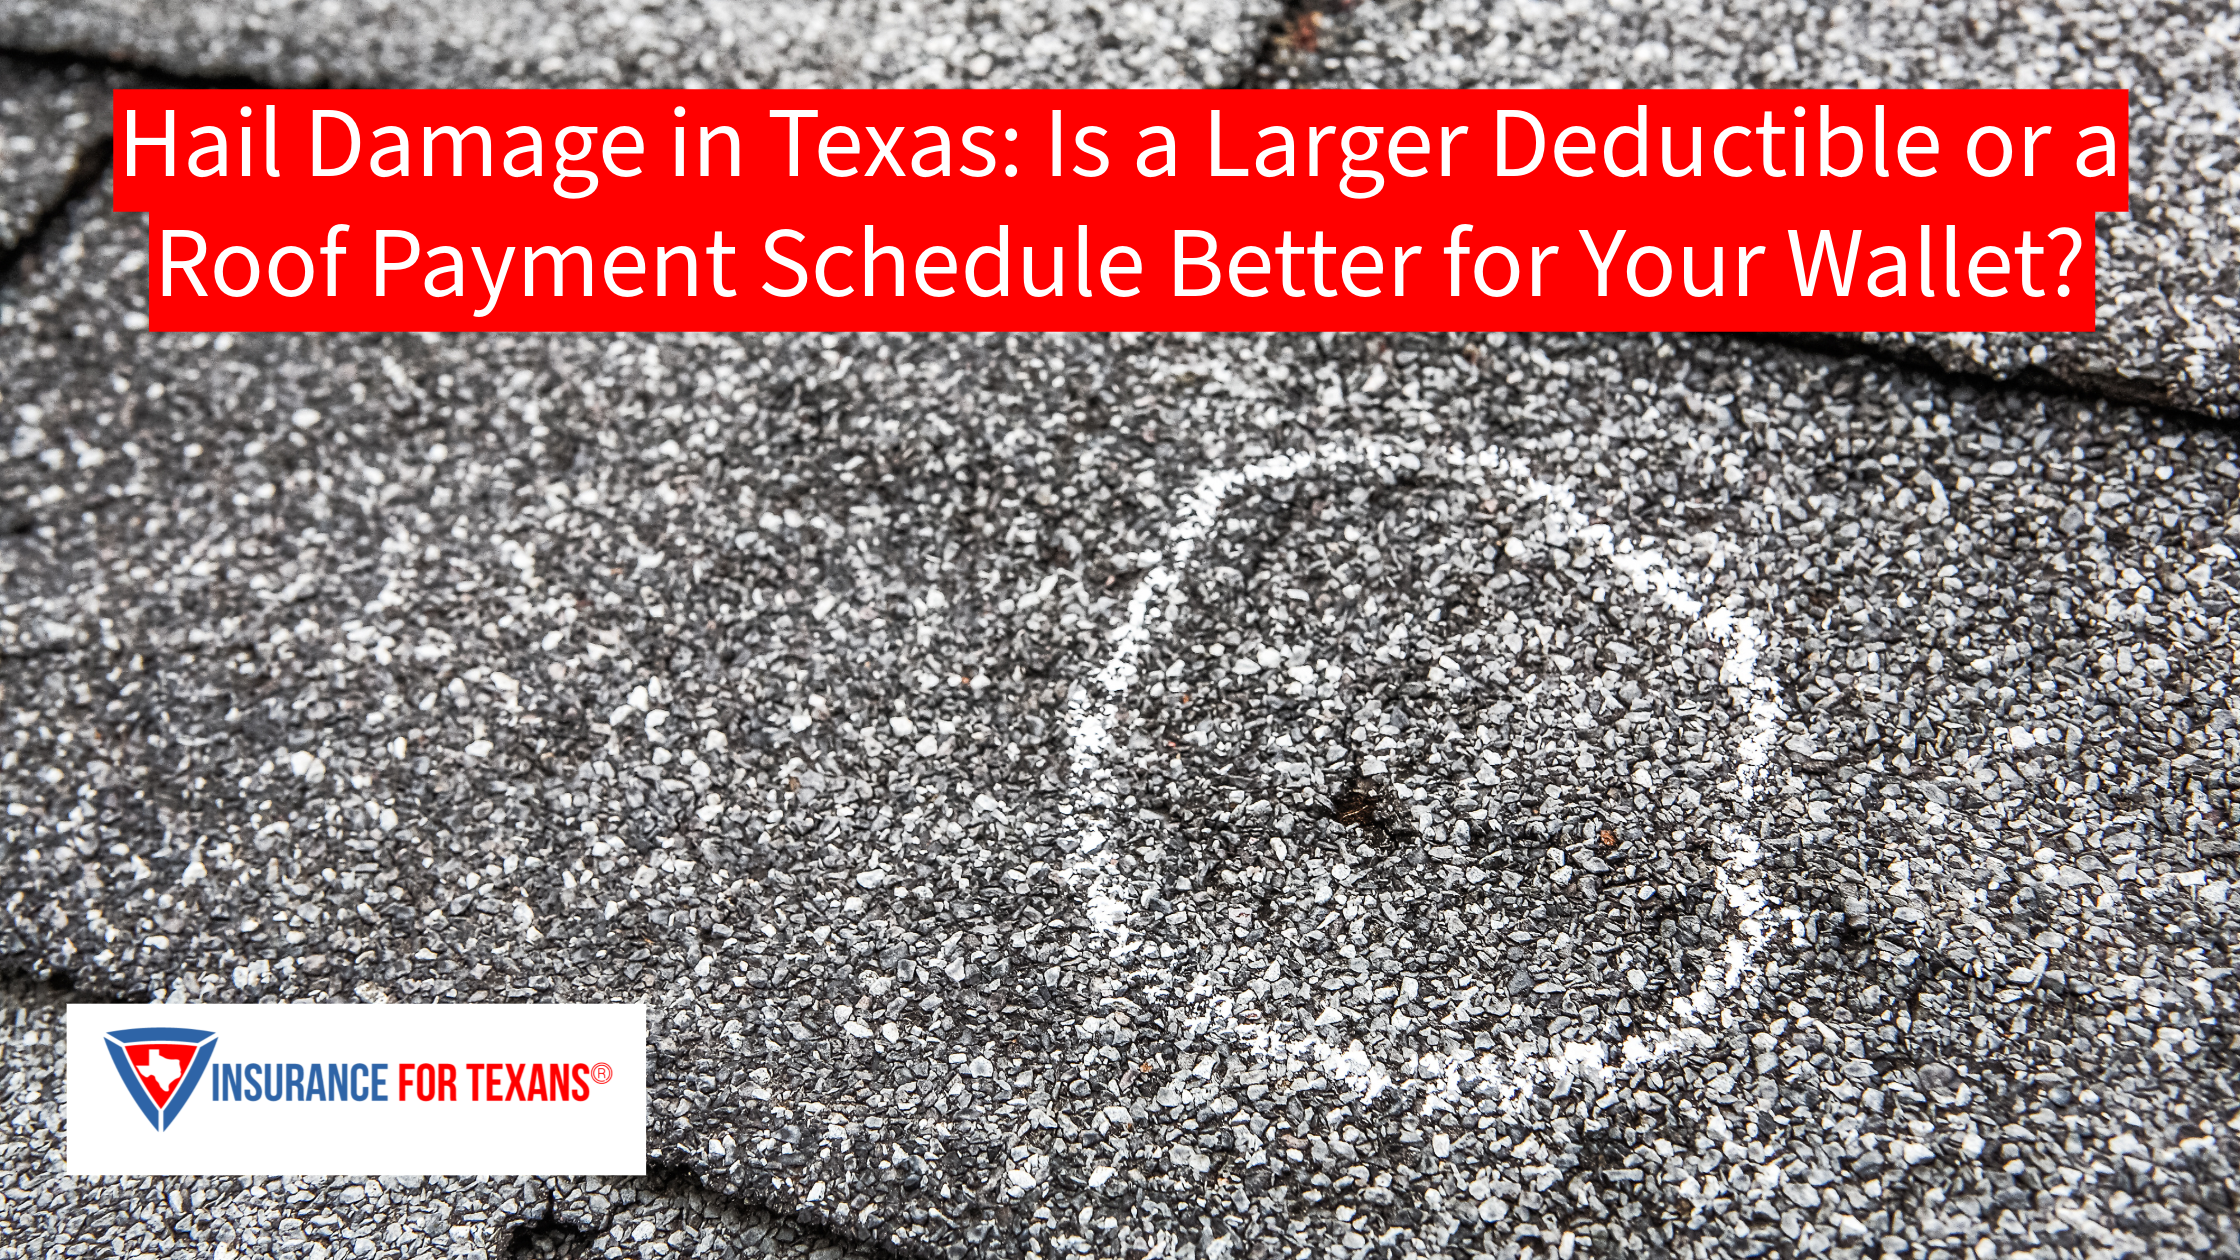 Hail Damage in Texas: Is a Larger Deductible or a Roof Payment Schedule Better for Your Wallet?